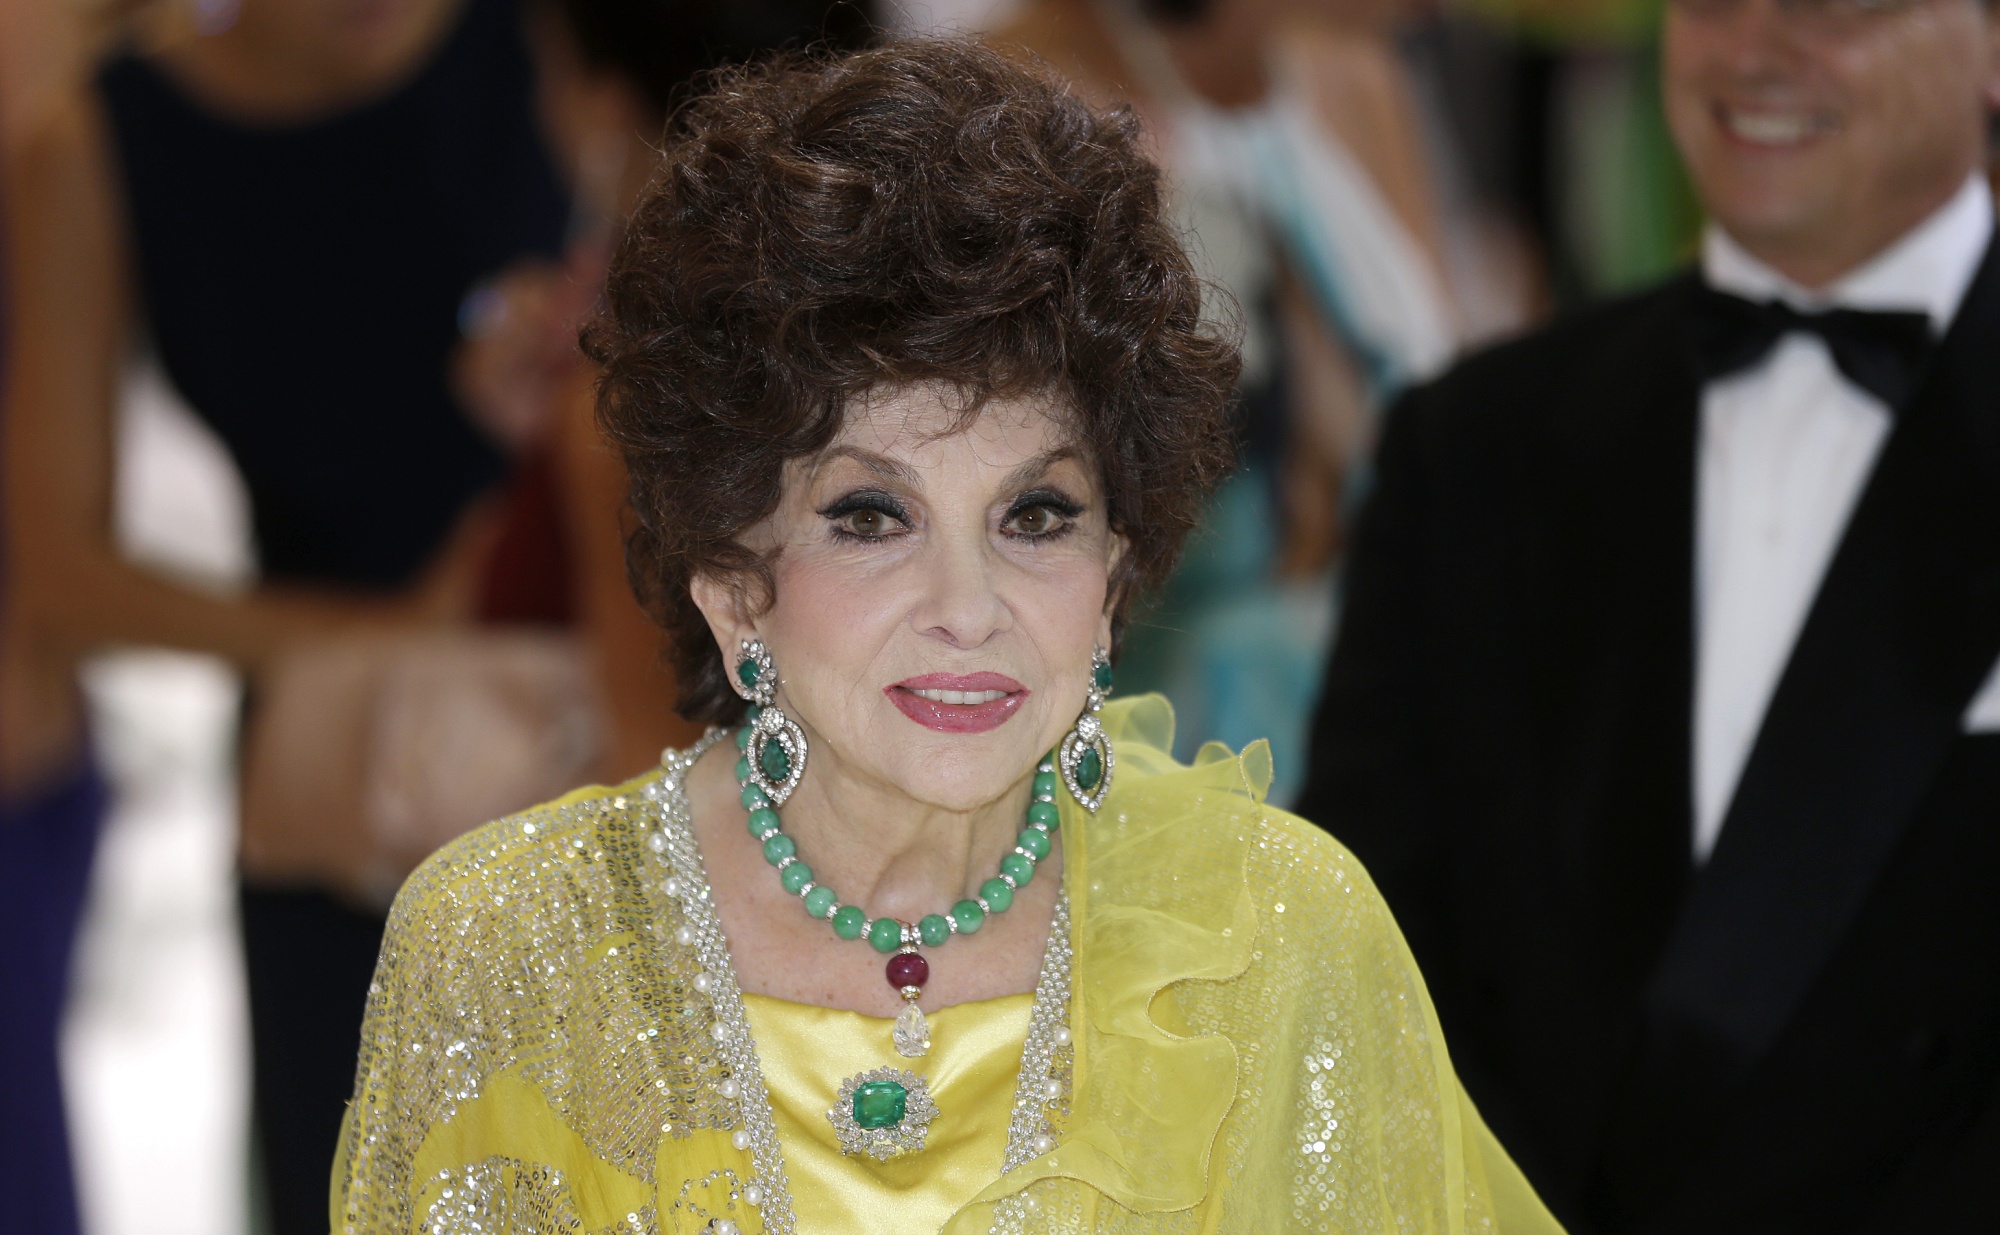 Italian actress Gina Lollobrigida arrives at the &quot;Monaco Red Cross Ball&quot;, Friday, Aug. 1, 2014, in Monaco. Italian film star Gina Lollobrigida has died in Rome at age 95. Italian news agency Lapresse reported Lollobrigida’s death on Monday, Jan. 16, 2023 quoting Tuscany Gov. Eugenio Giani. (AP Photo/Lionel Cironneau, File)